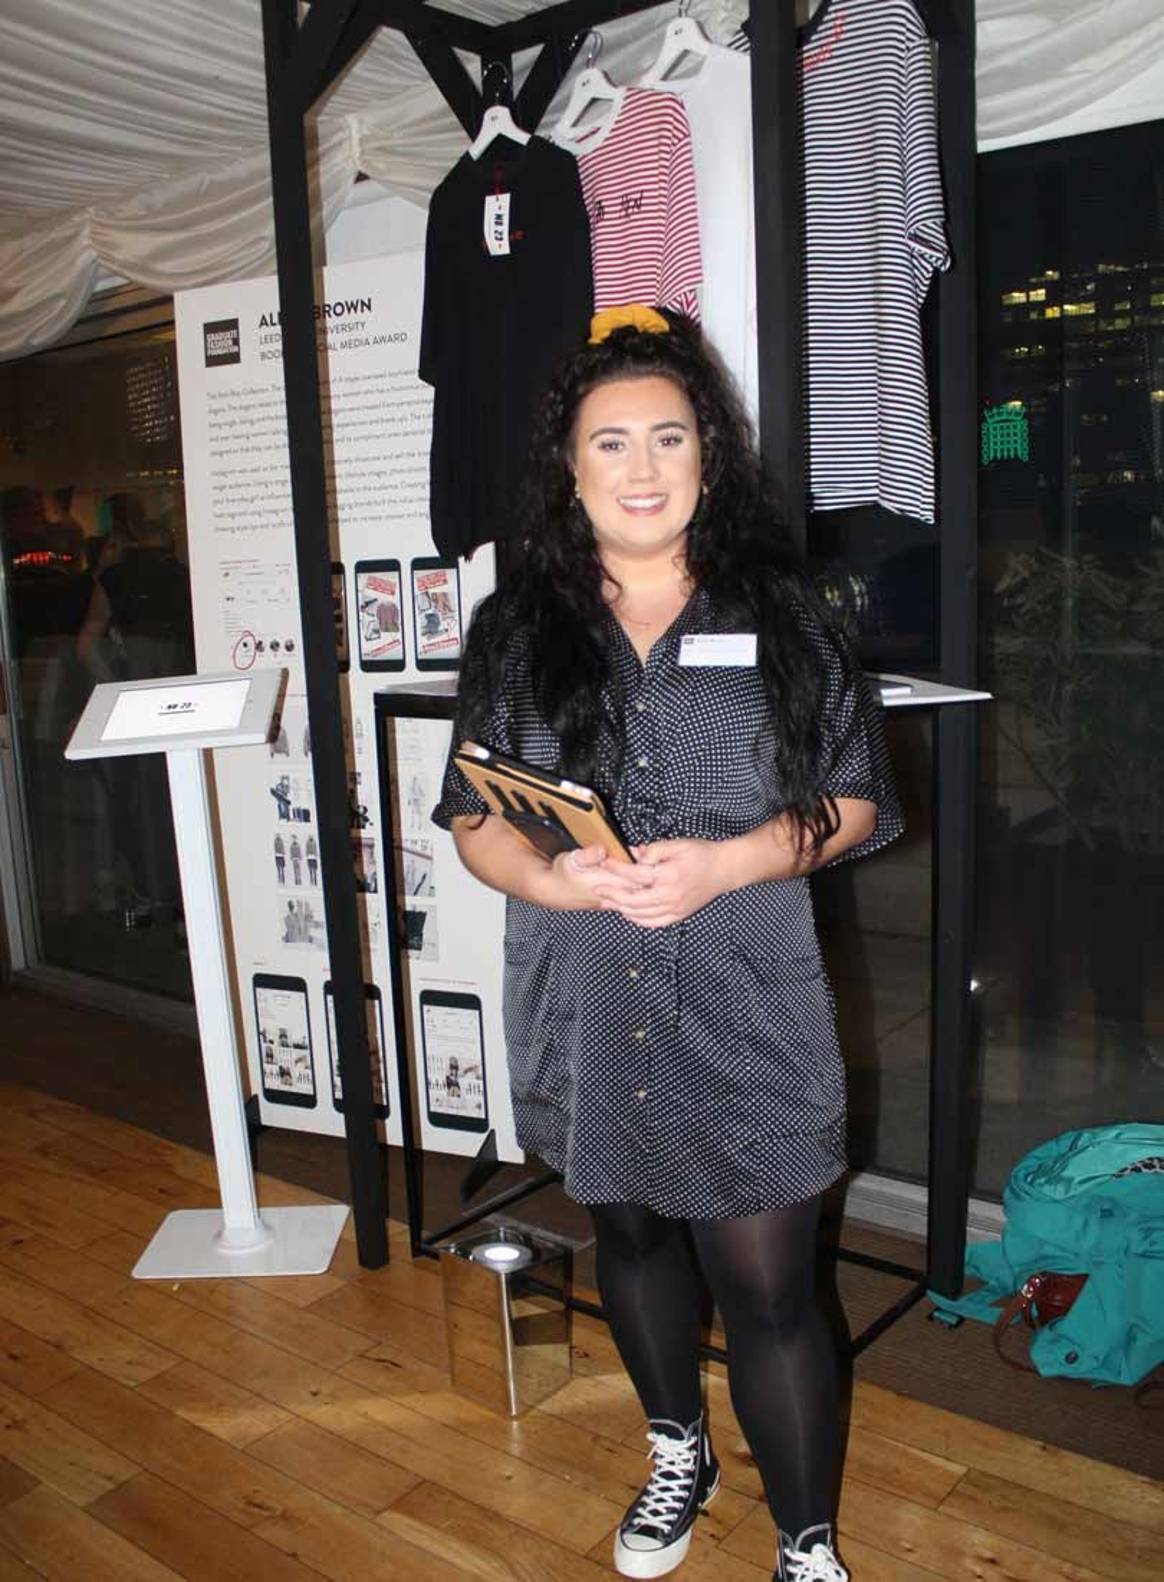 GFW talent showcased at Houses of Parliament